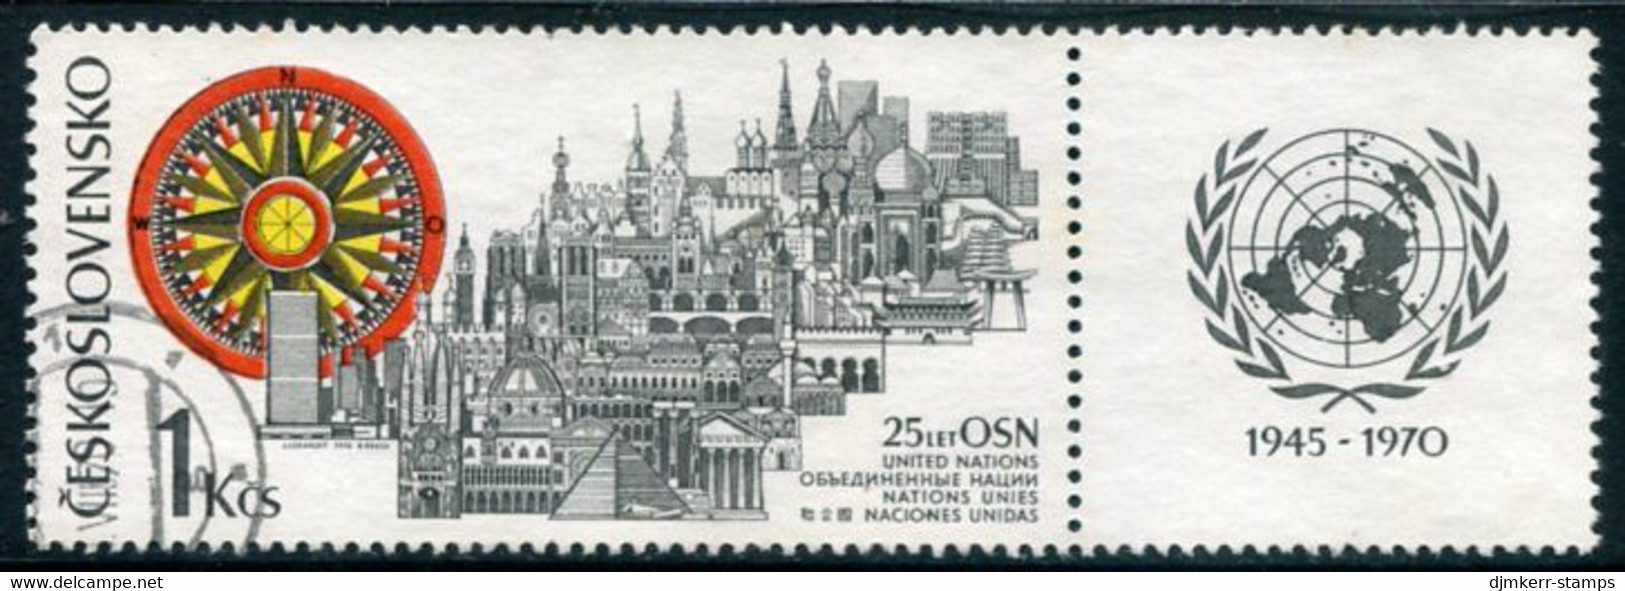 CZECHOSLOVAKIA 1970 UNO 25th Anniversary With Label MNH / ** Michel 1945 Zf - Unused Stamps